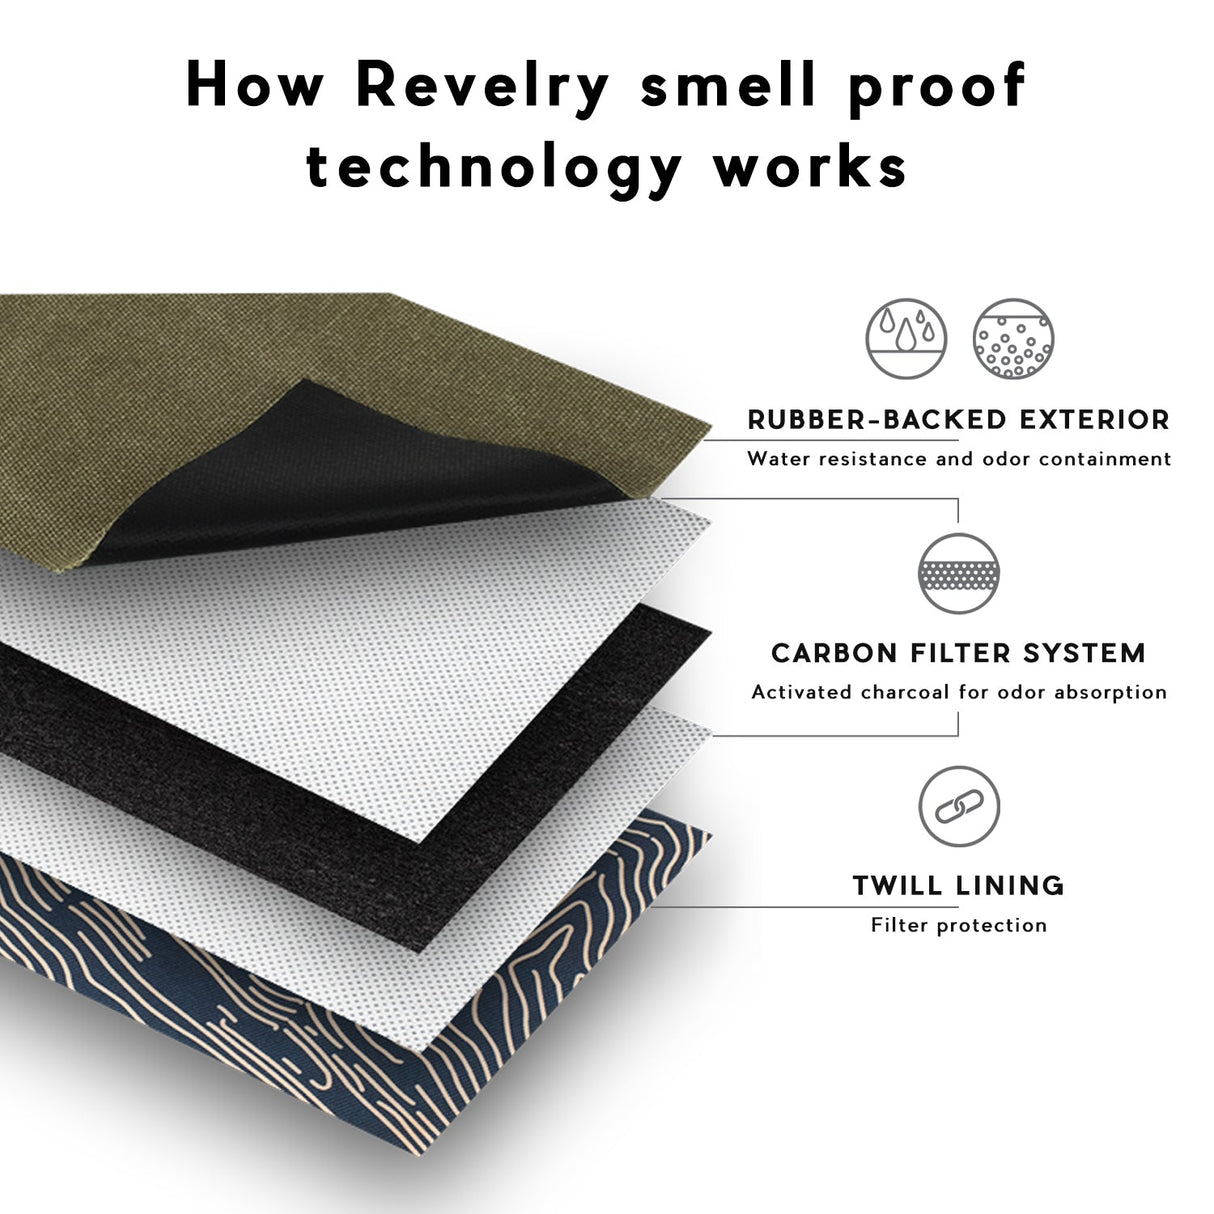 Revelry Supply 'The Gordo' Padded Pouch Materials, Smell Proof Technology Explained